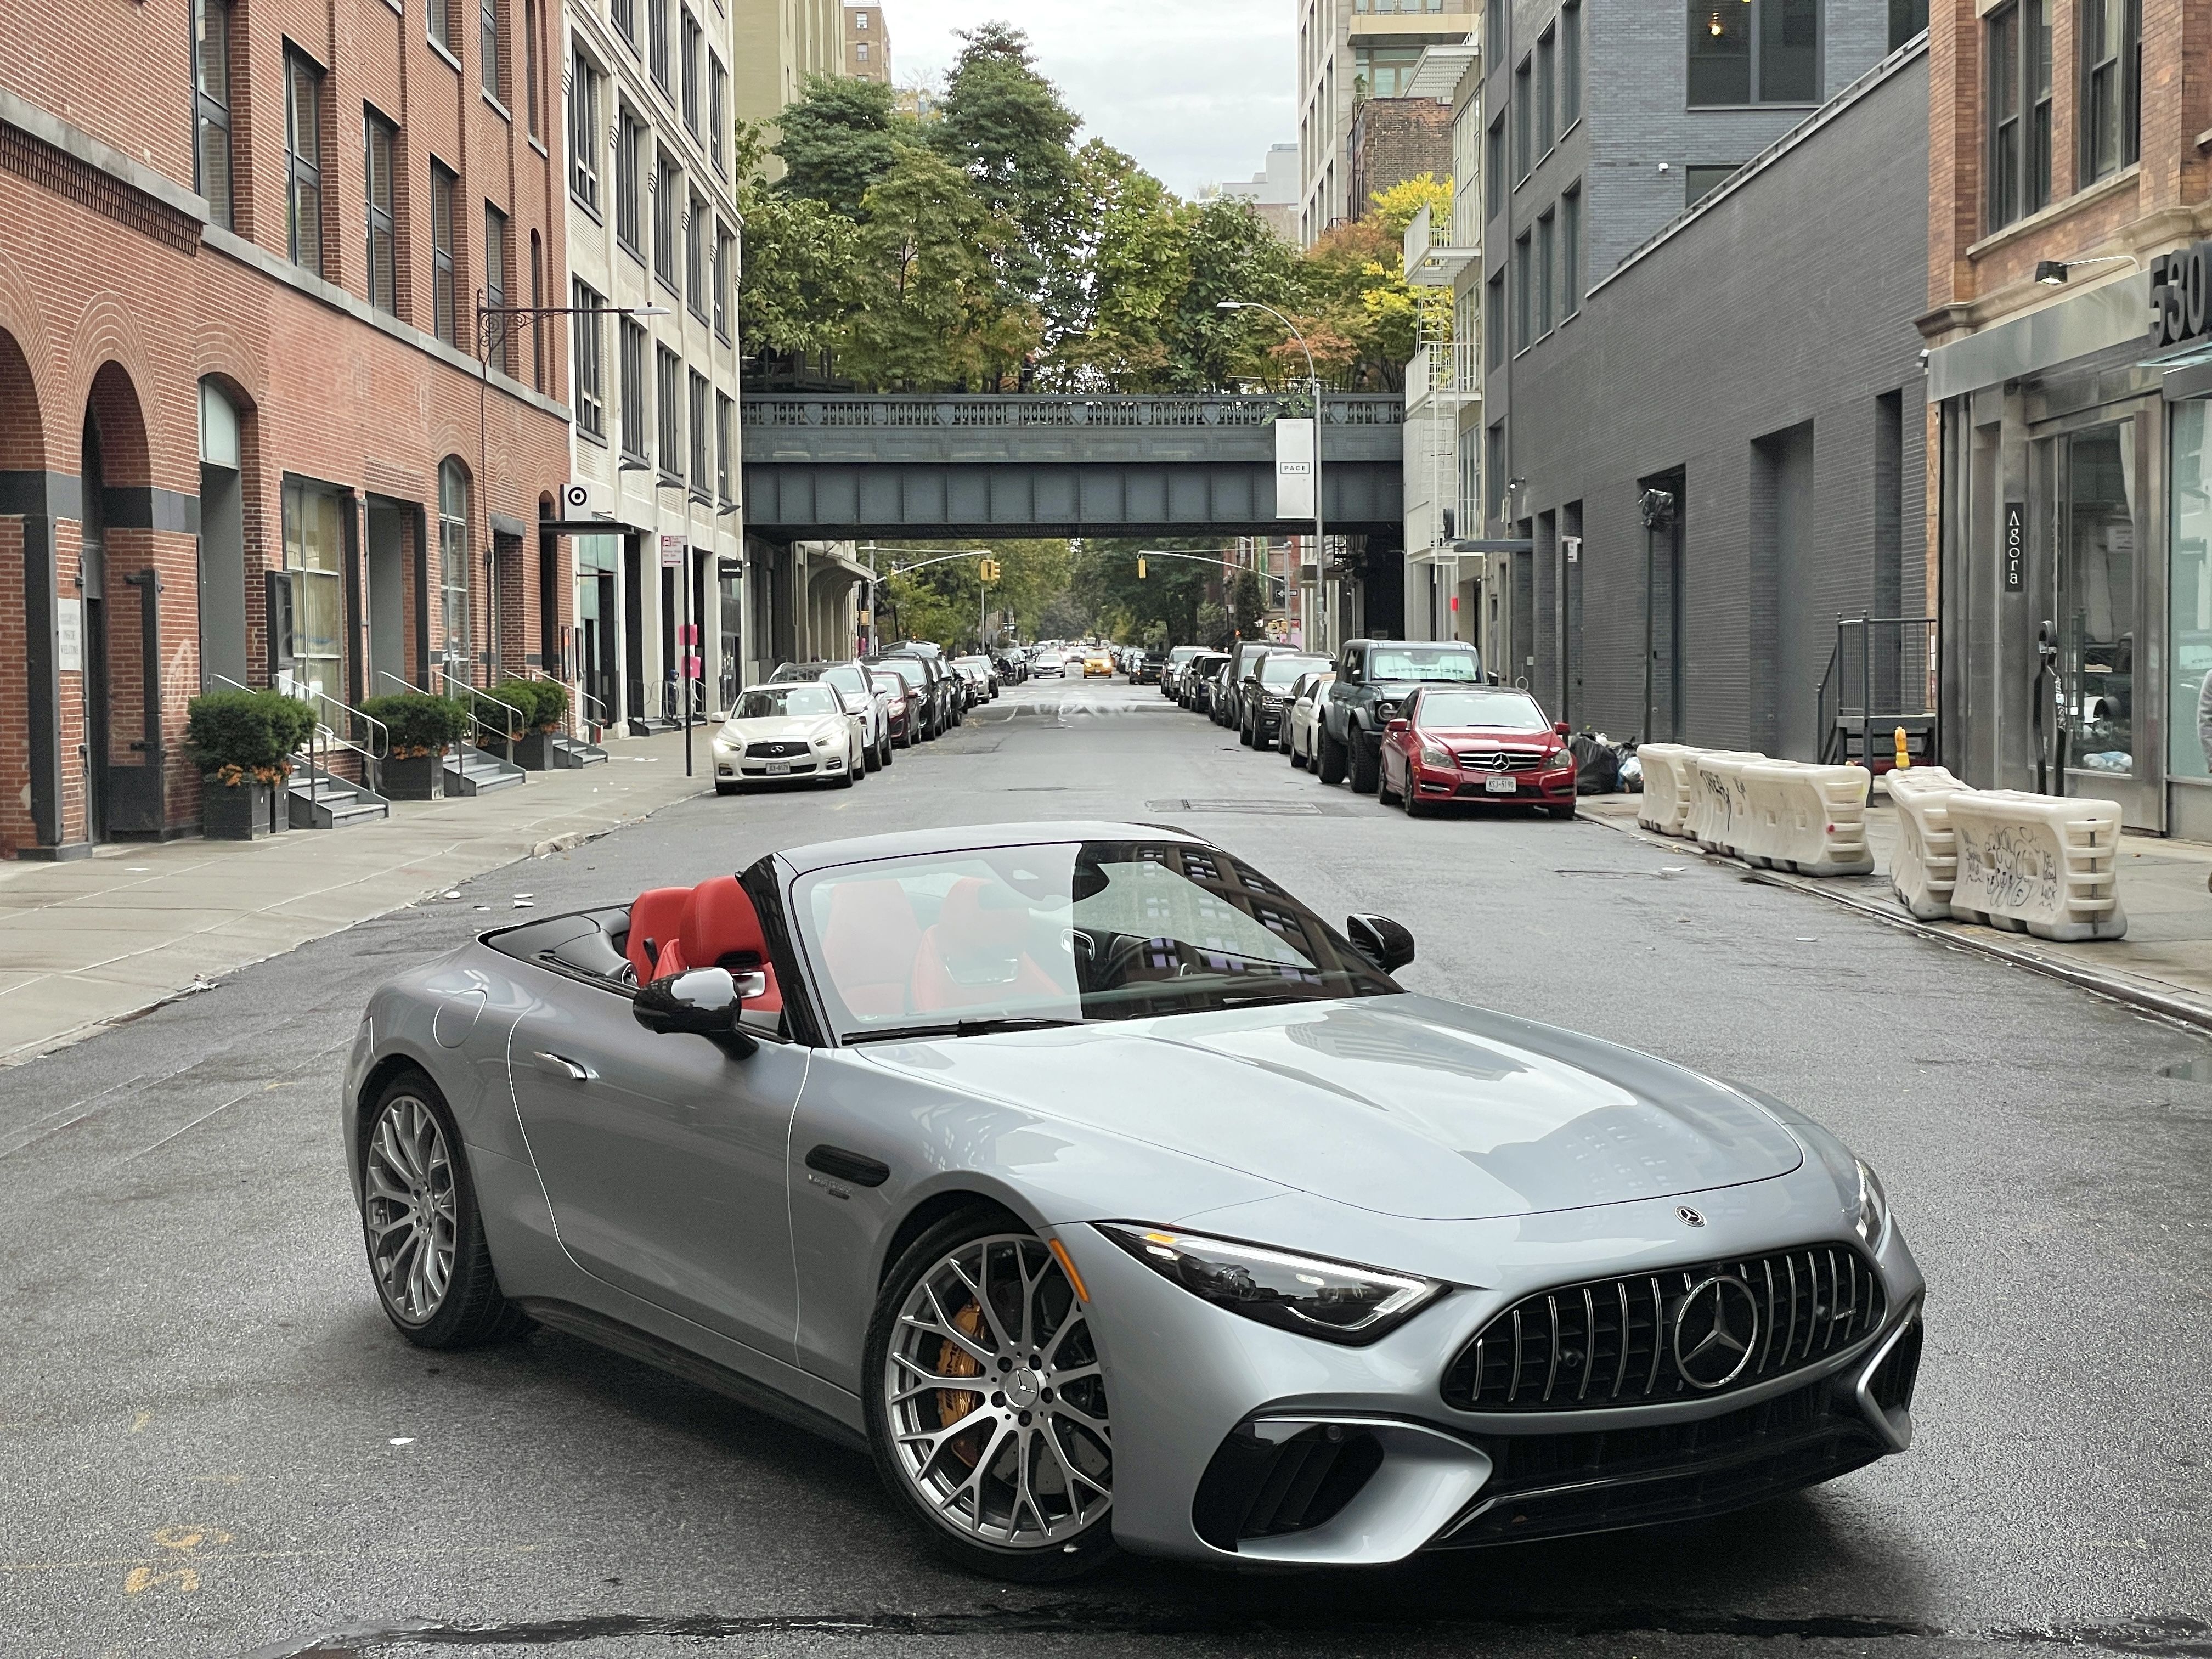 2022 Mercedes-AMG SL Now Available With Matching Luggage Set